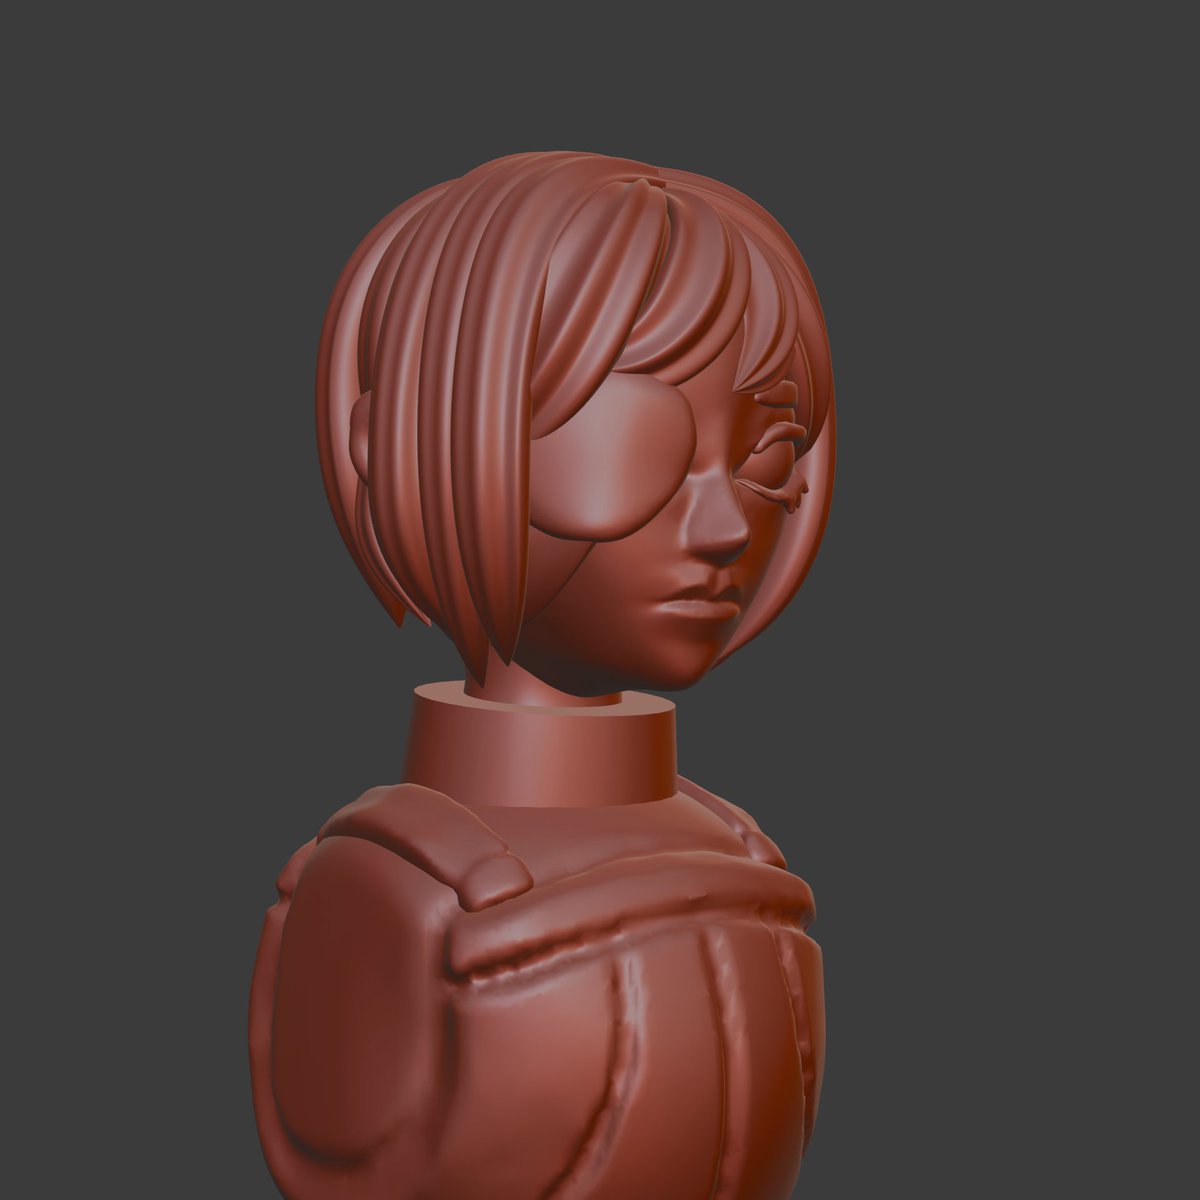 Now that I've learnt many techniques and skills in blender over the past two years, I can finally sculpt one of @hou_jae04's characters as a 28mm miniature. #wip #blender #3D #3DPrinting #modelling #miniature #art #fanart